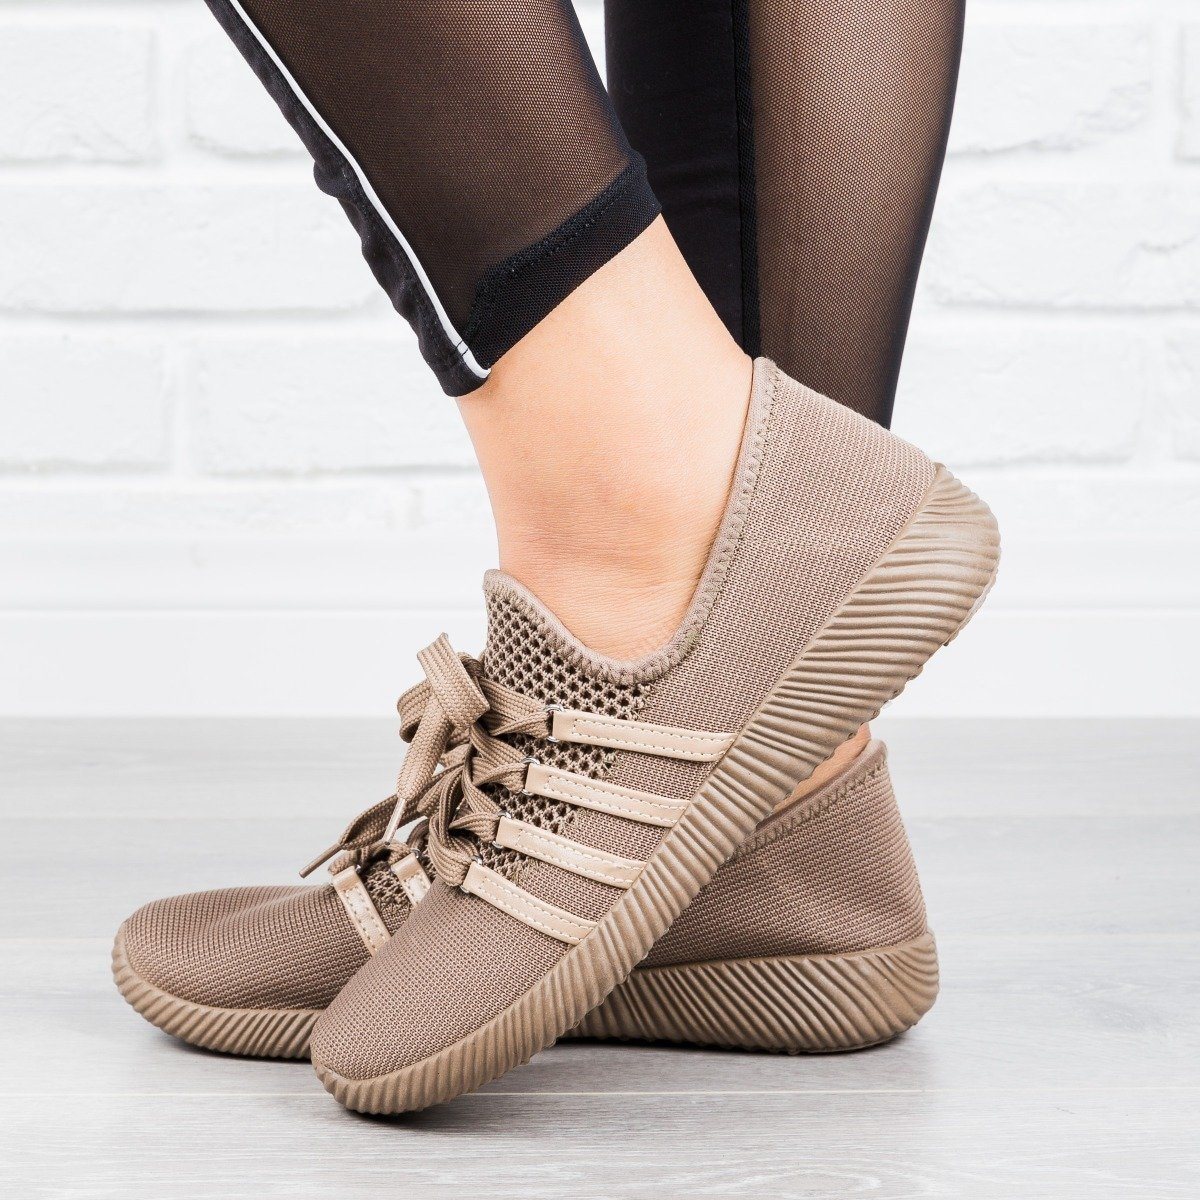 nacara lace up sneakers